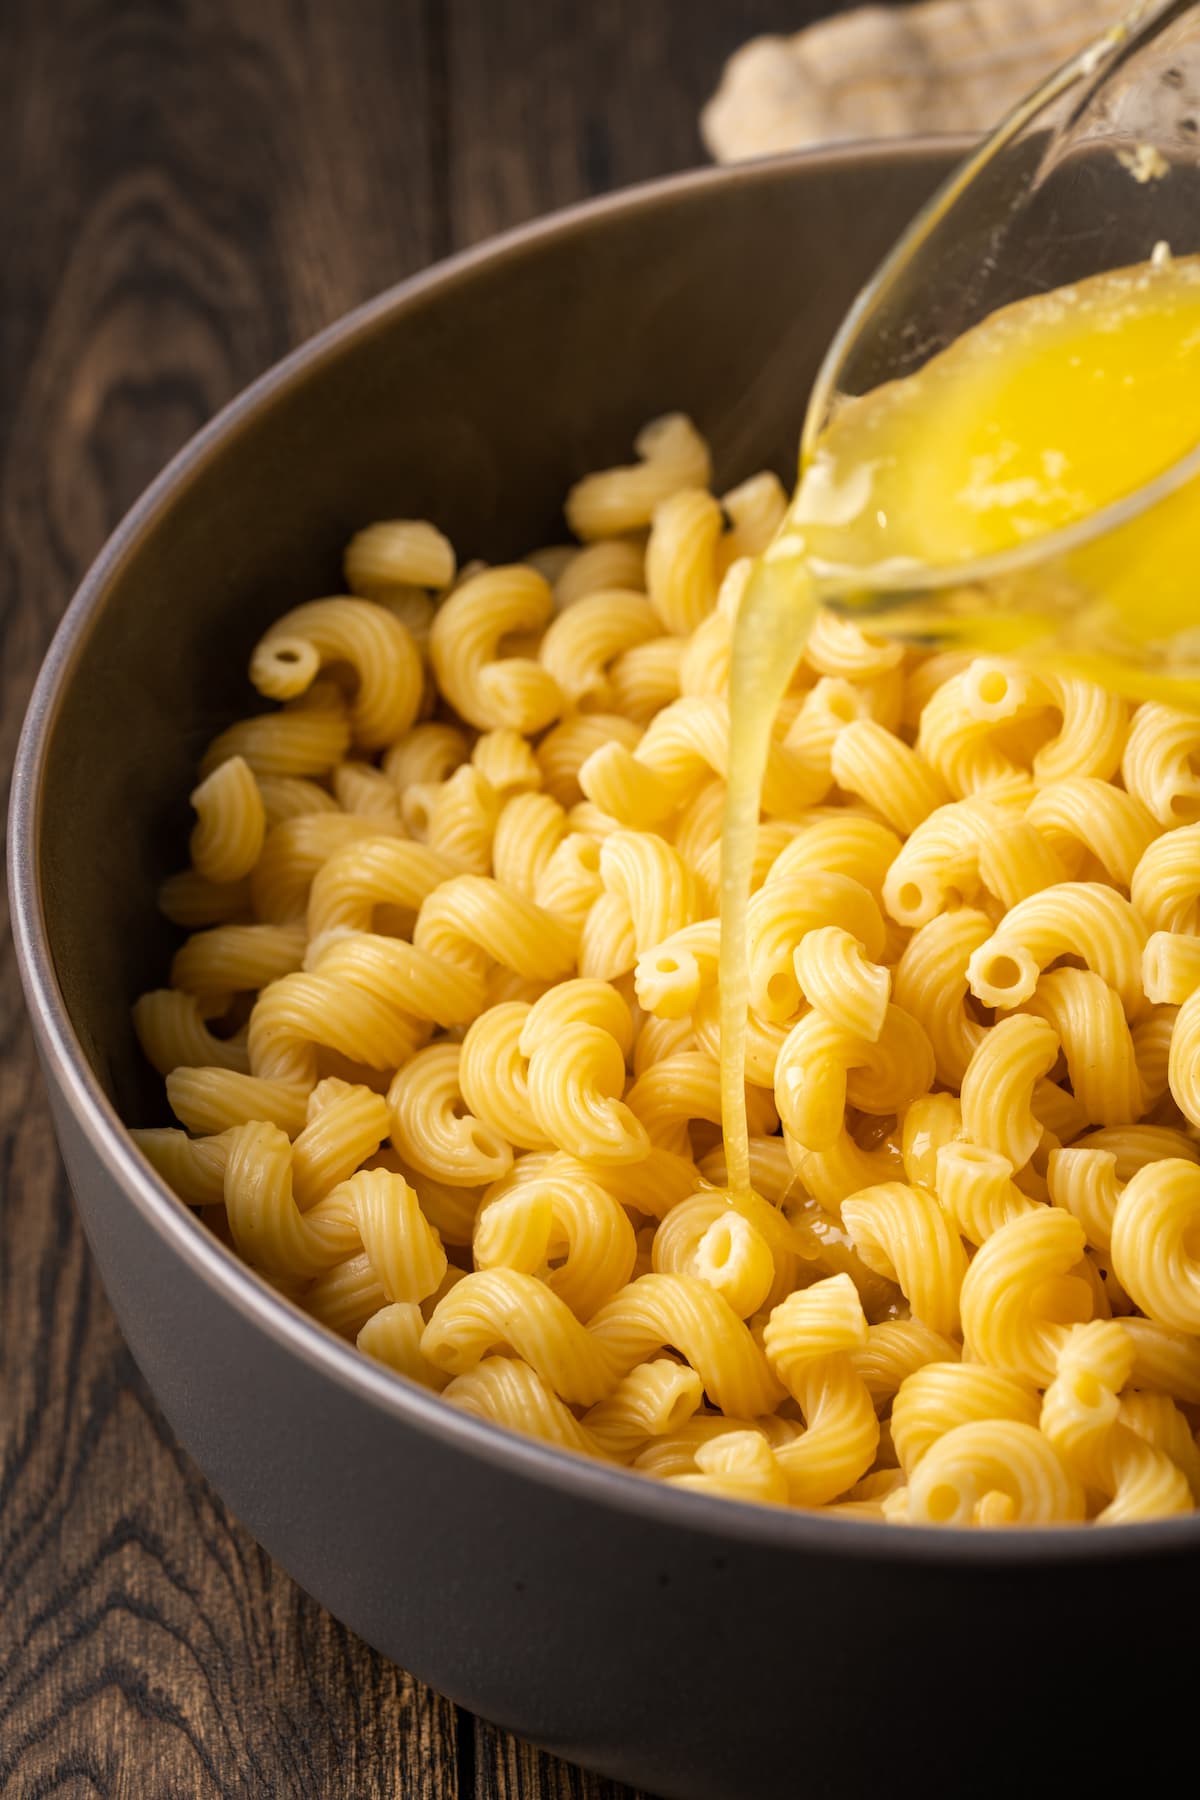 Melted garlic butter is poured over top of cooked pasta in a large pot.